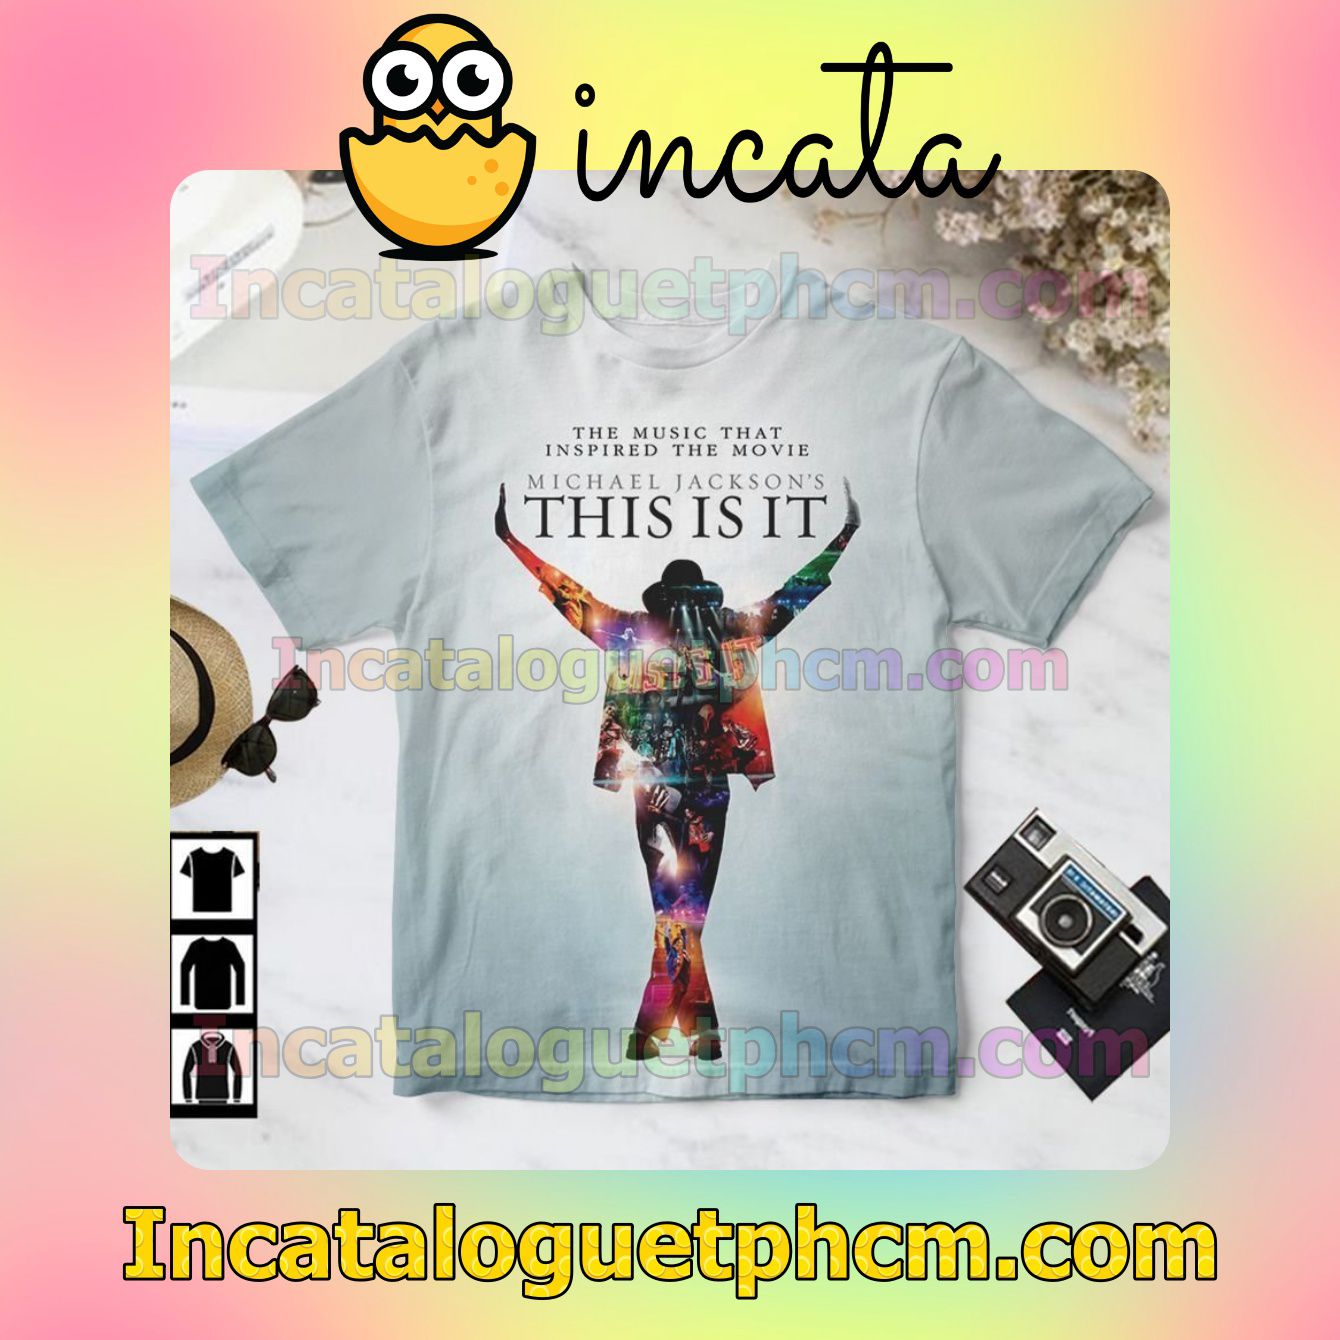 Michael Jackson's This Is It Album Cover For Fan Shirt